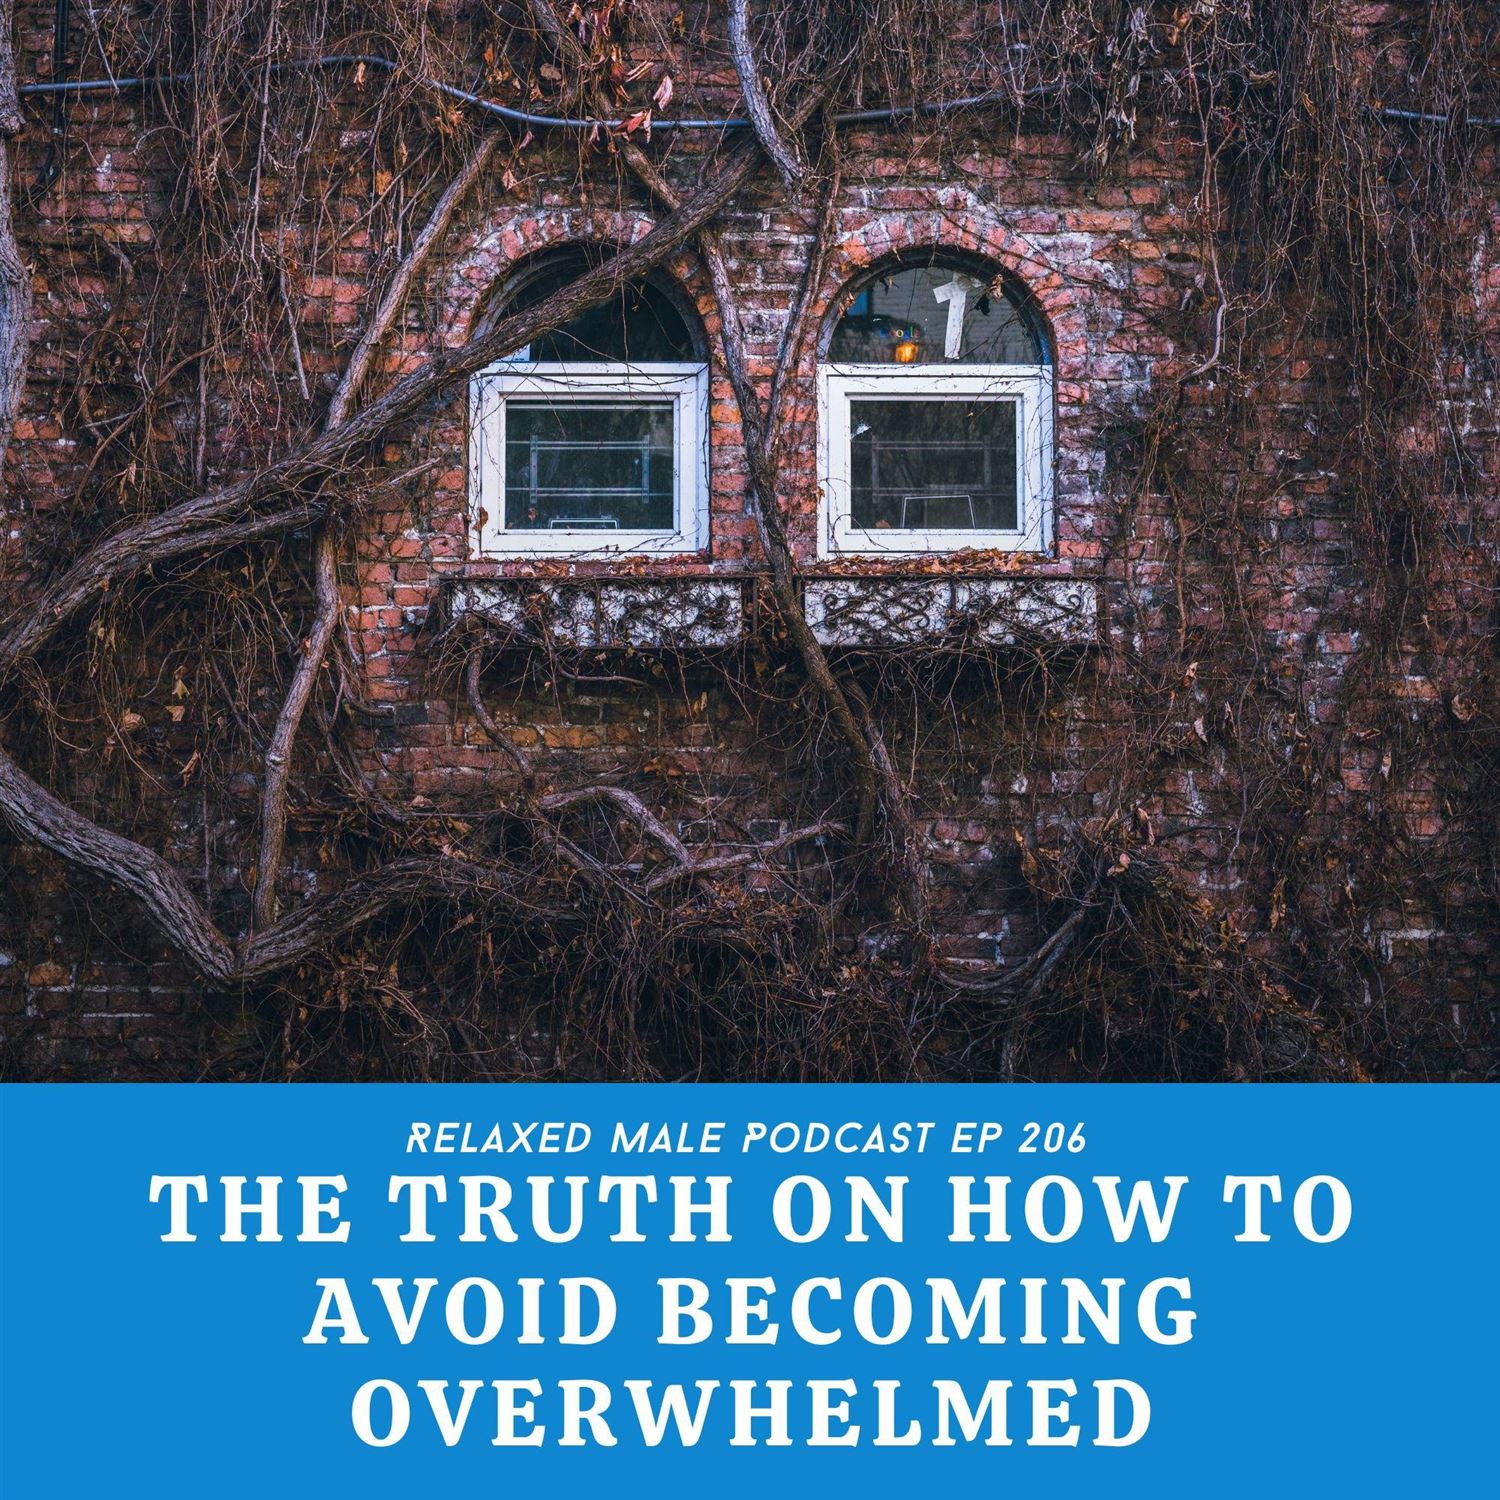 The Truth On How to Avoid Becoming Overwhelmed